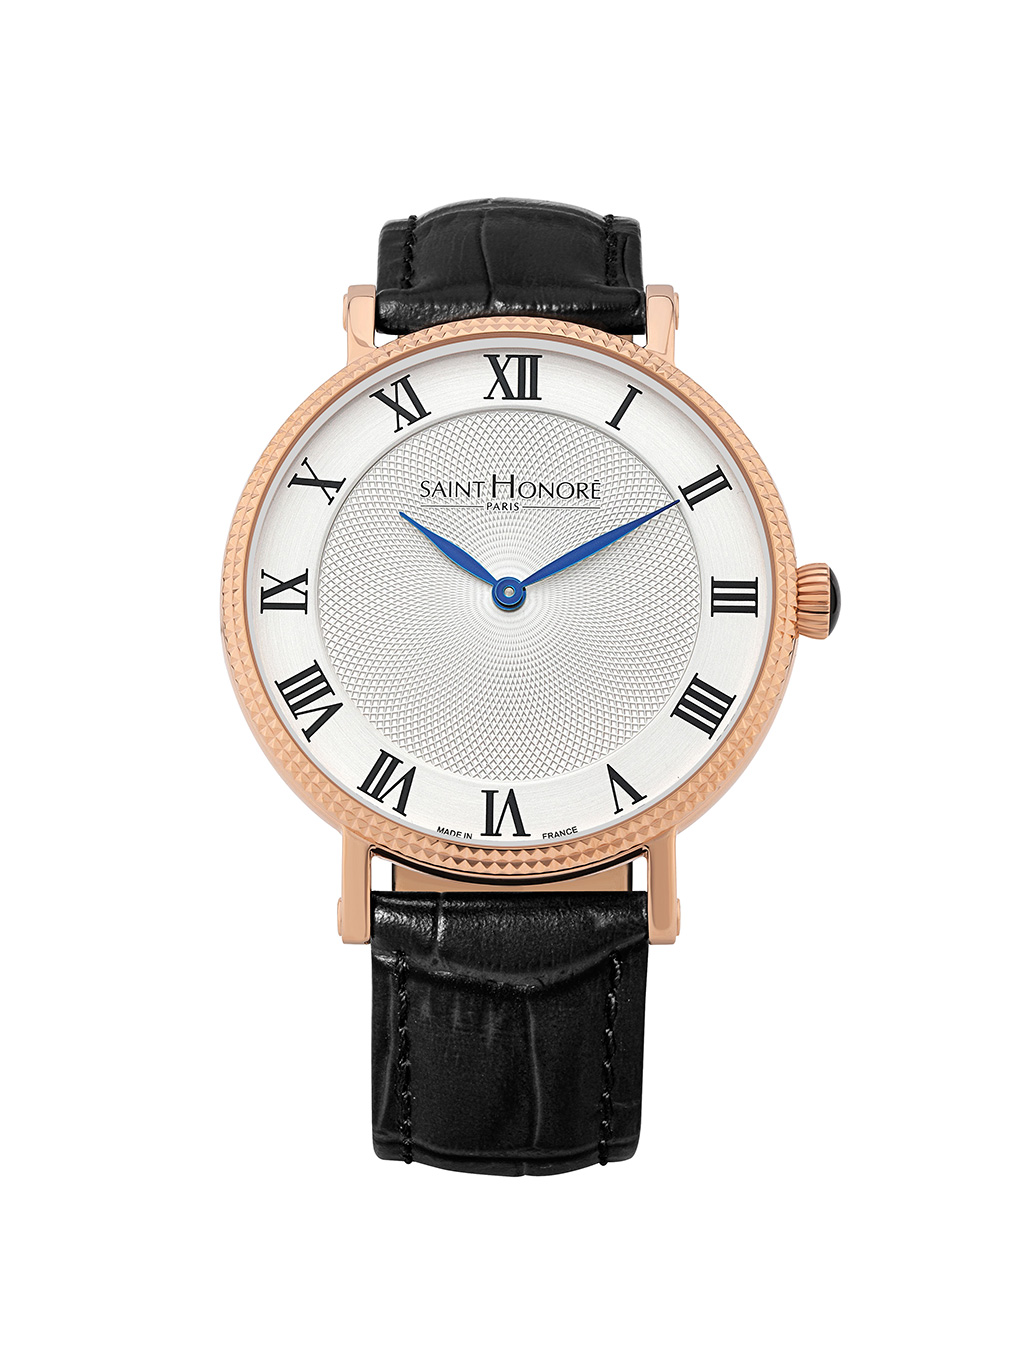 TROCADERO Men's watch - ion plating gold case, white dial, black leather strap